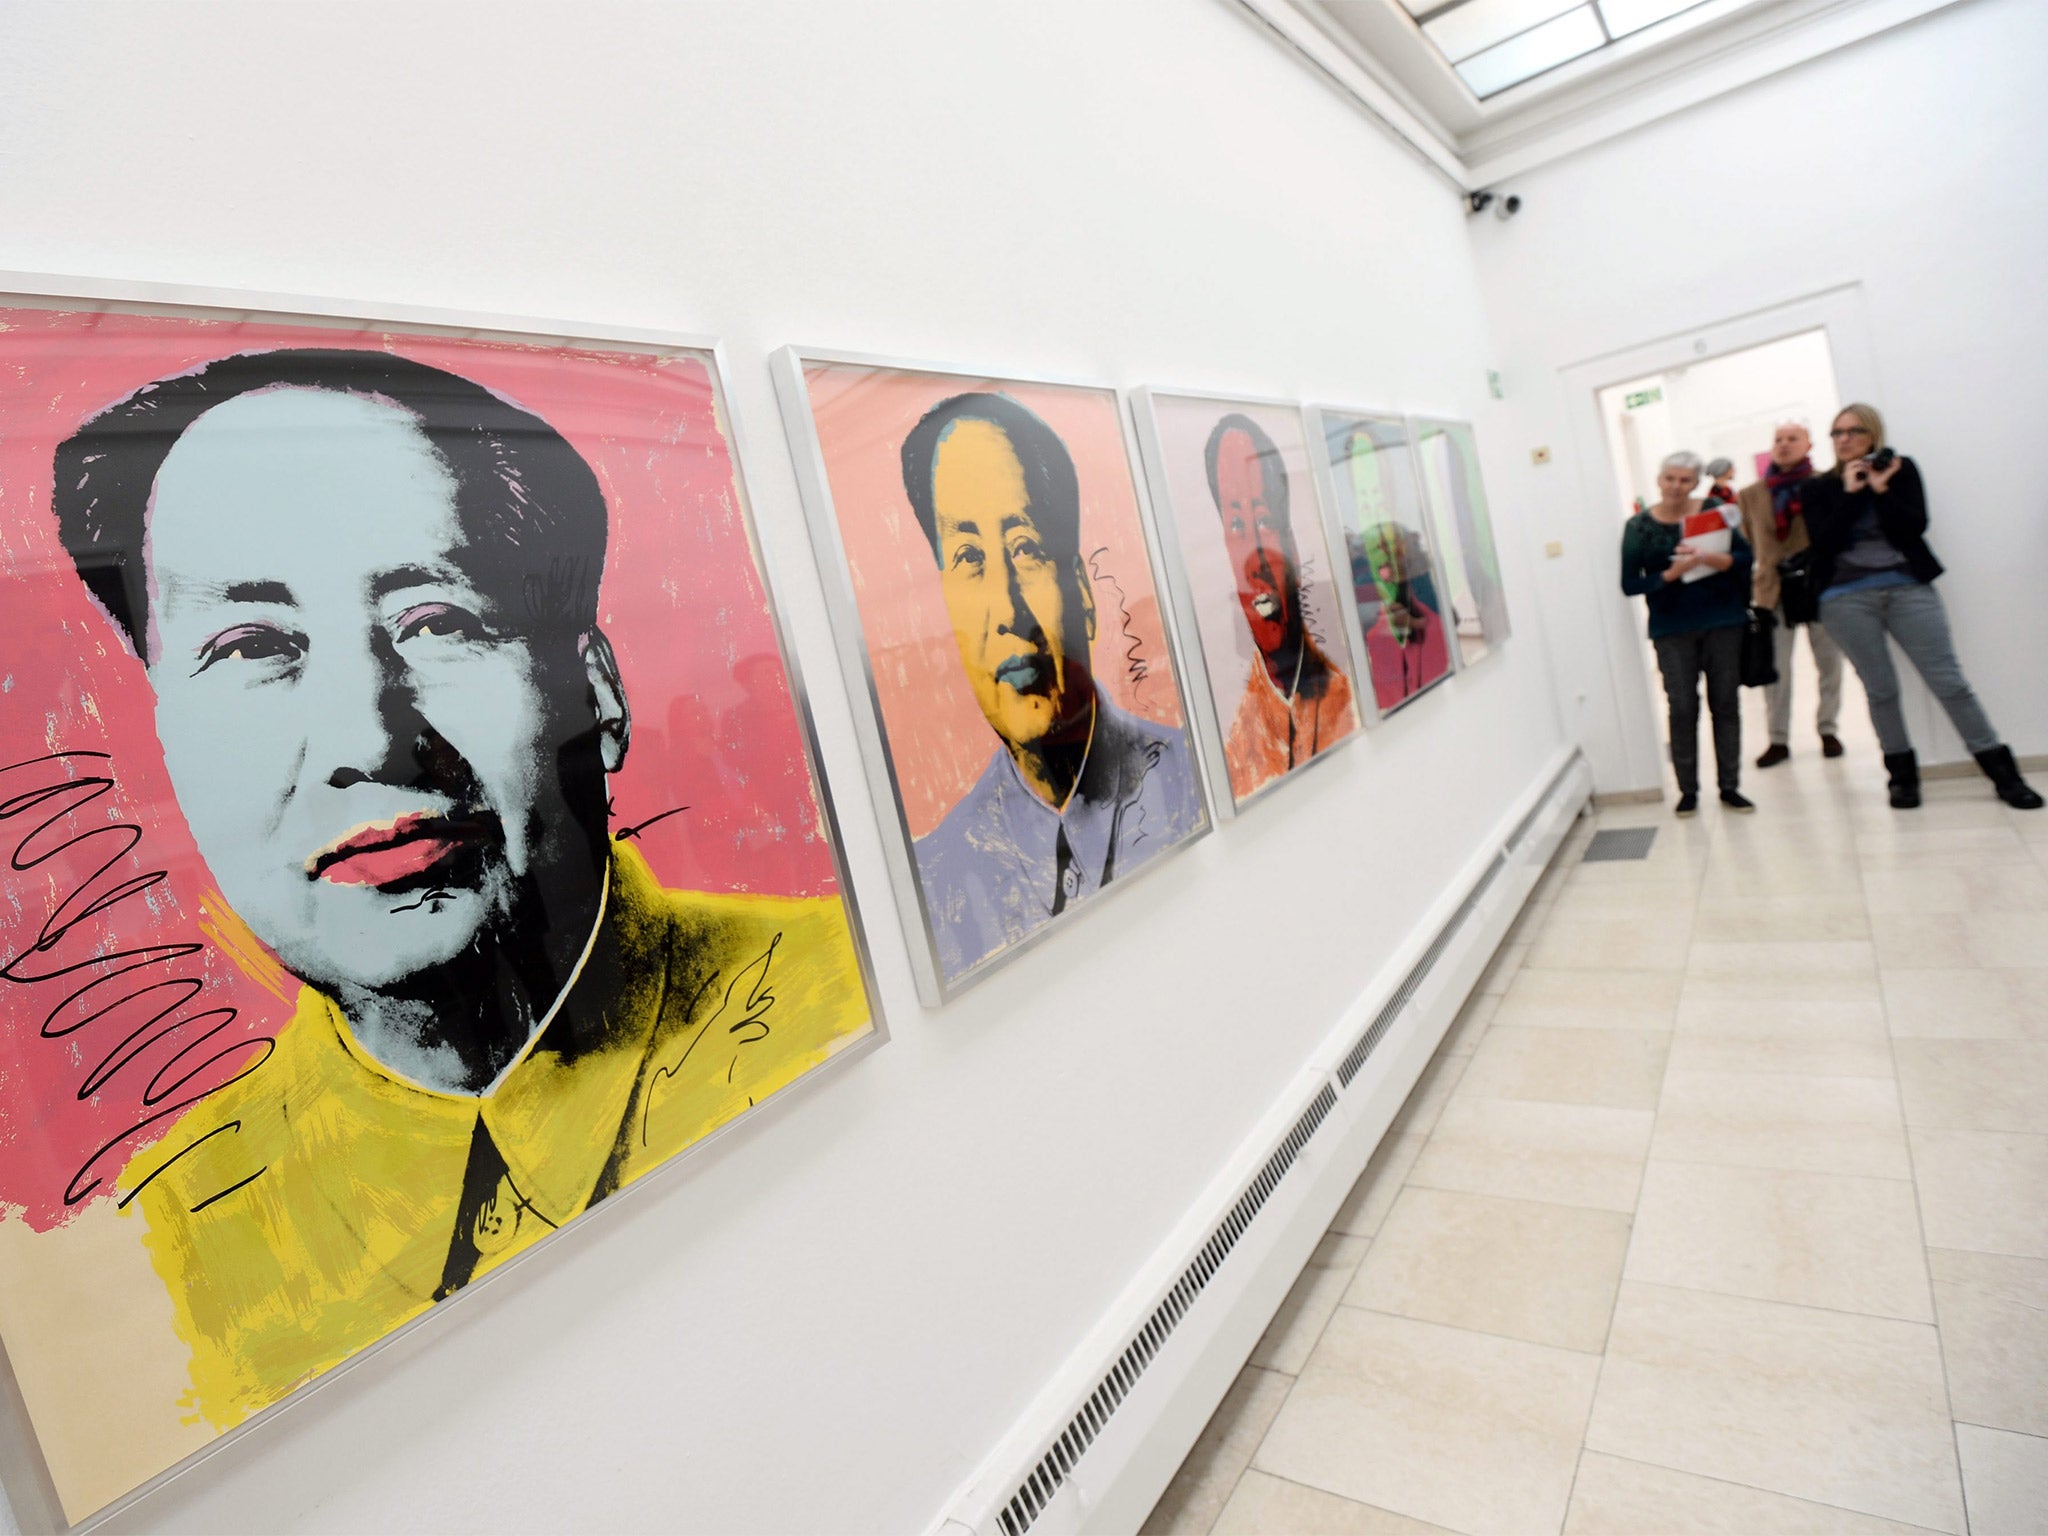 Silkscreen portraits of Chairman Mao by Andy Warhol in the Staedtische Galerie in Rosenheim, Germany